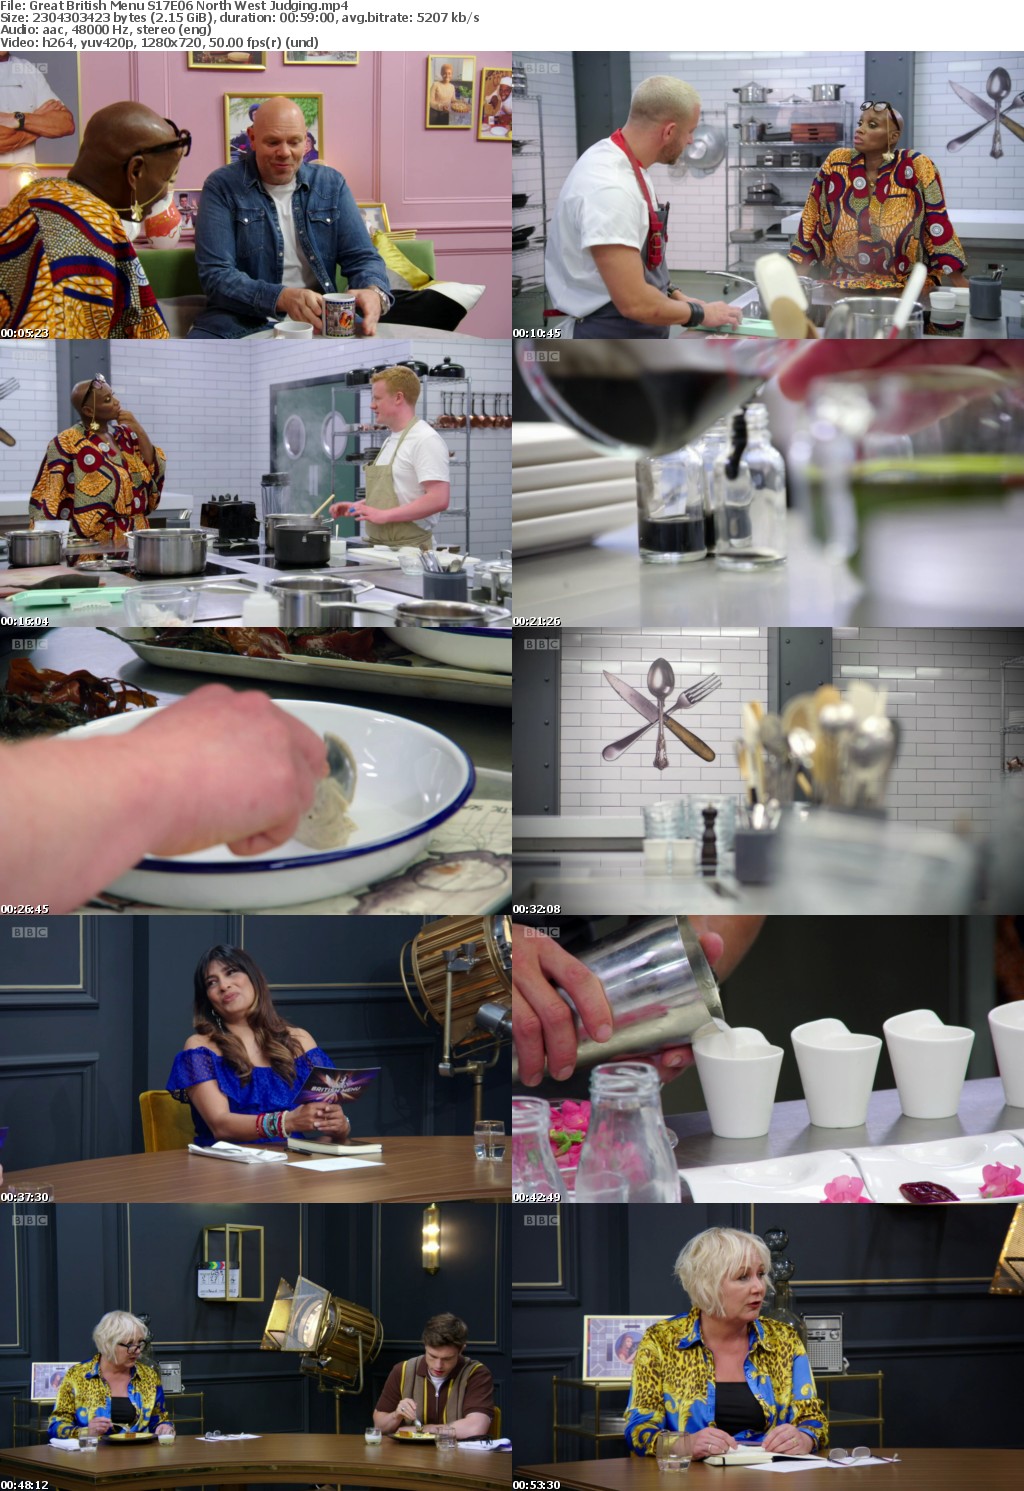 Great British Menu S17E06 North West Judging (1280x720p HD, 50fps, soft Eng subs)